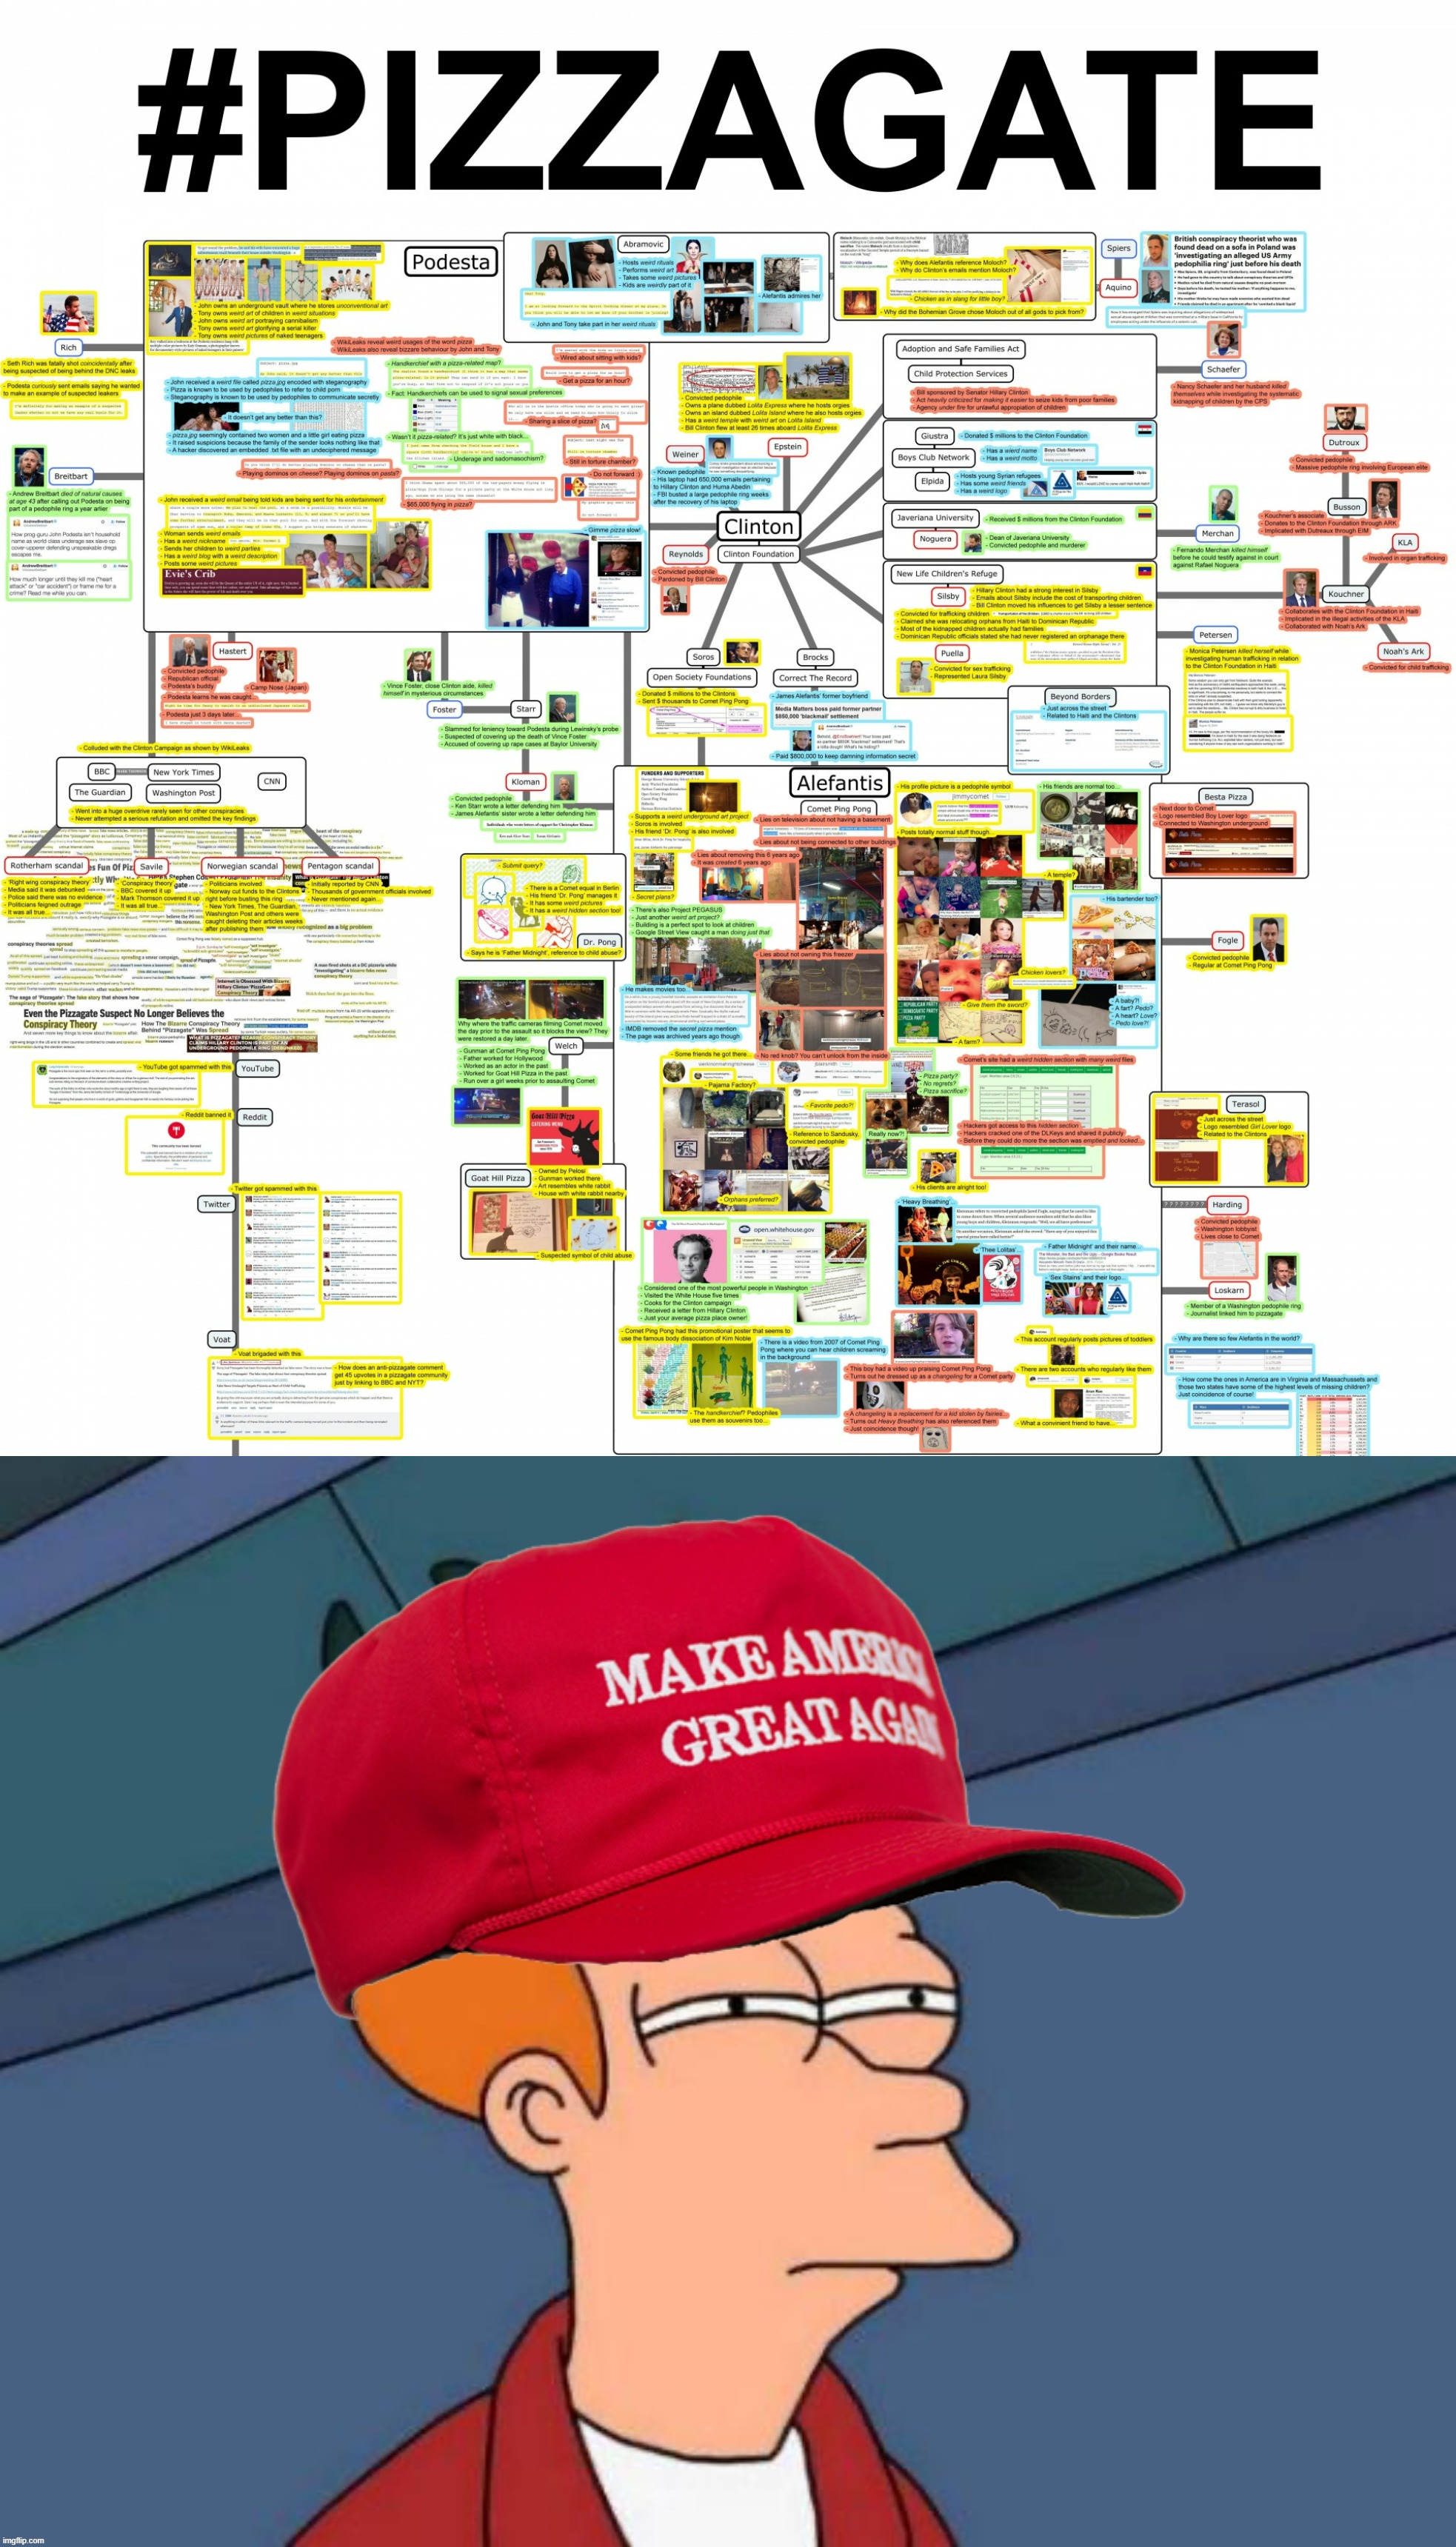 Average pizza-related conspiracy meme | image tagged in pizzagate chart dumb,maga futurama fry | made w/ Imgflip meme maker